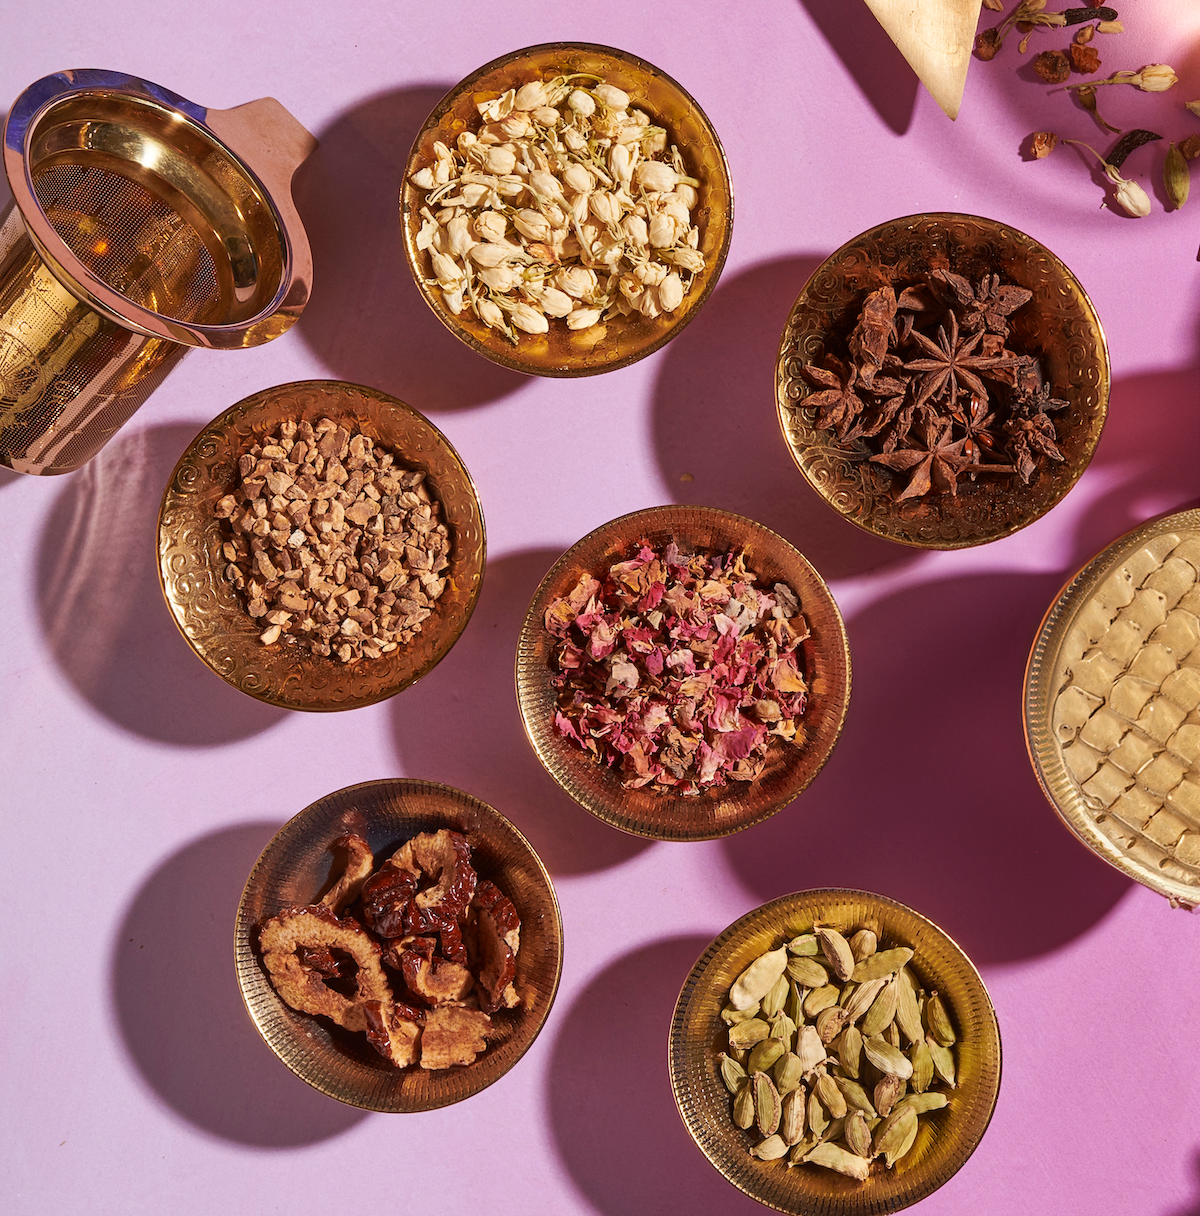 An arrangement of six bowls filled with various dried ingredients on a pink surface. The items include seeds, spices, and dried flowers, perfect for crafting your own loose leaf tea using The Star: Vanilla-Ginger Beauty Potion with Jasmine & Shatavari from Magic Hour. A brass mortar and pestle, along with a triangular cloth bag, are also present in the composition.